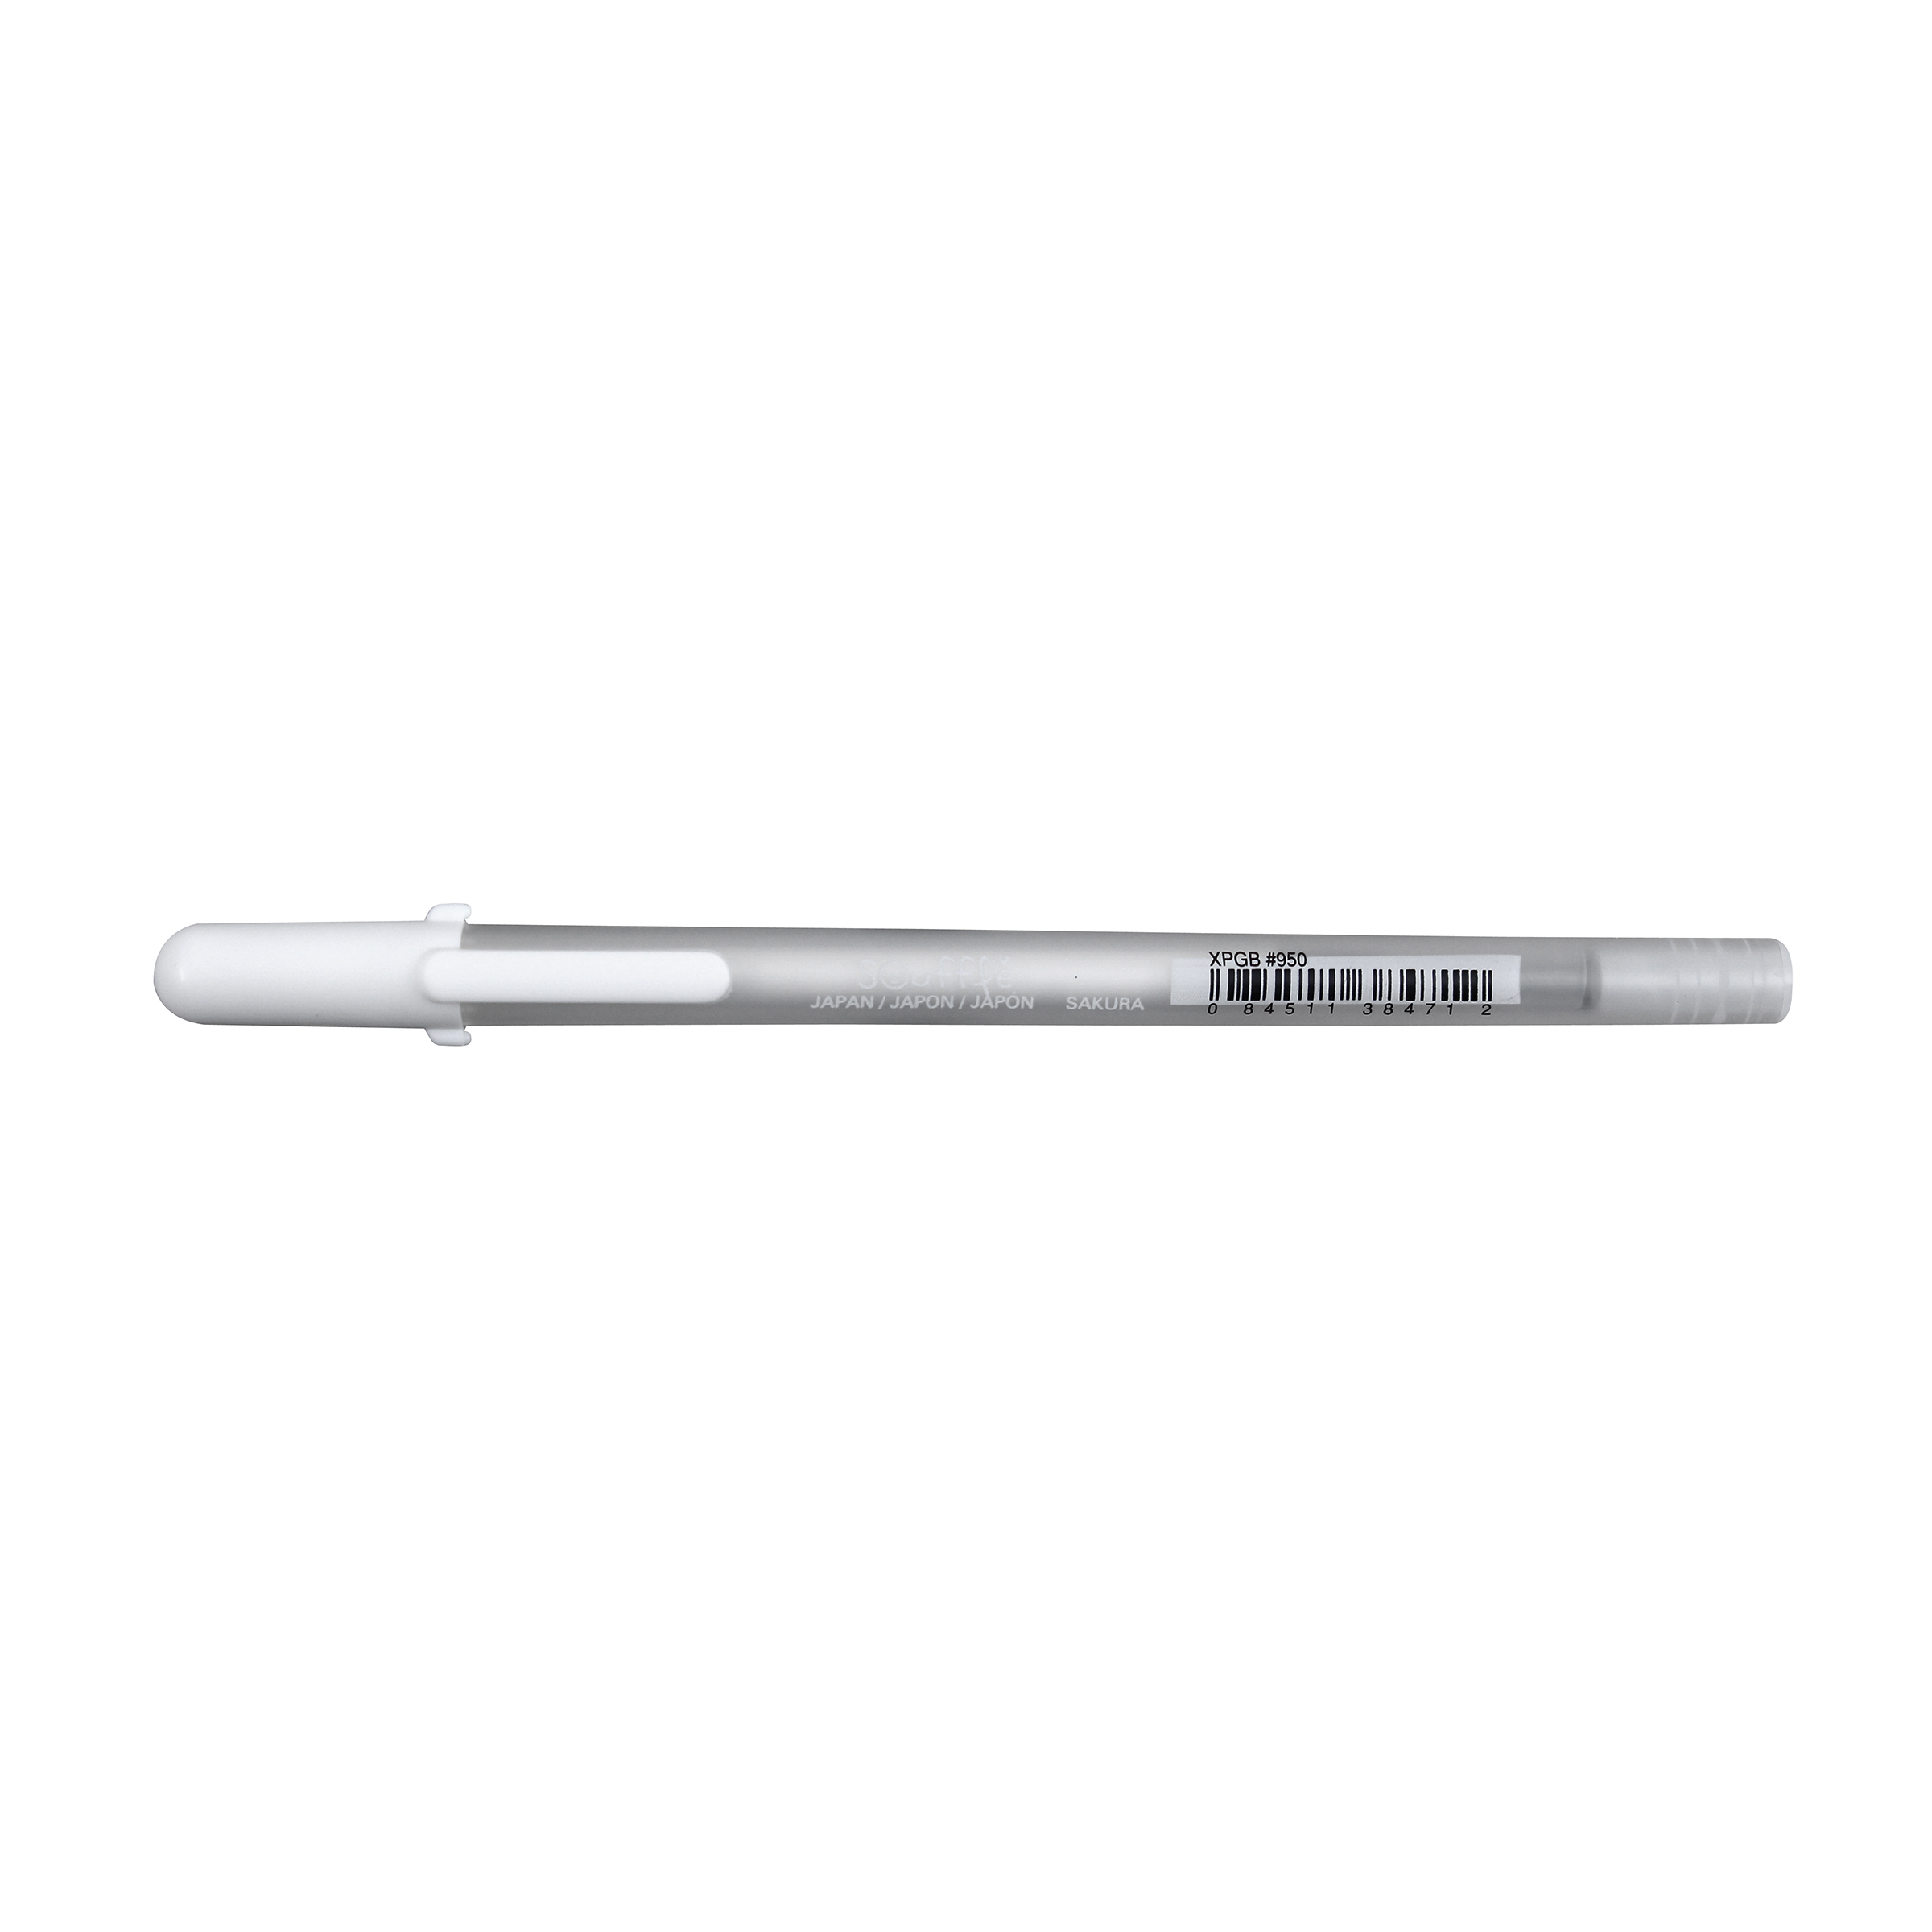 Sakura Gelly Roll White Gel Pen Review: Yay or Nay? – Acoustic